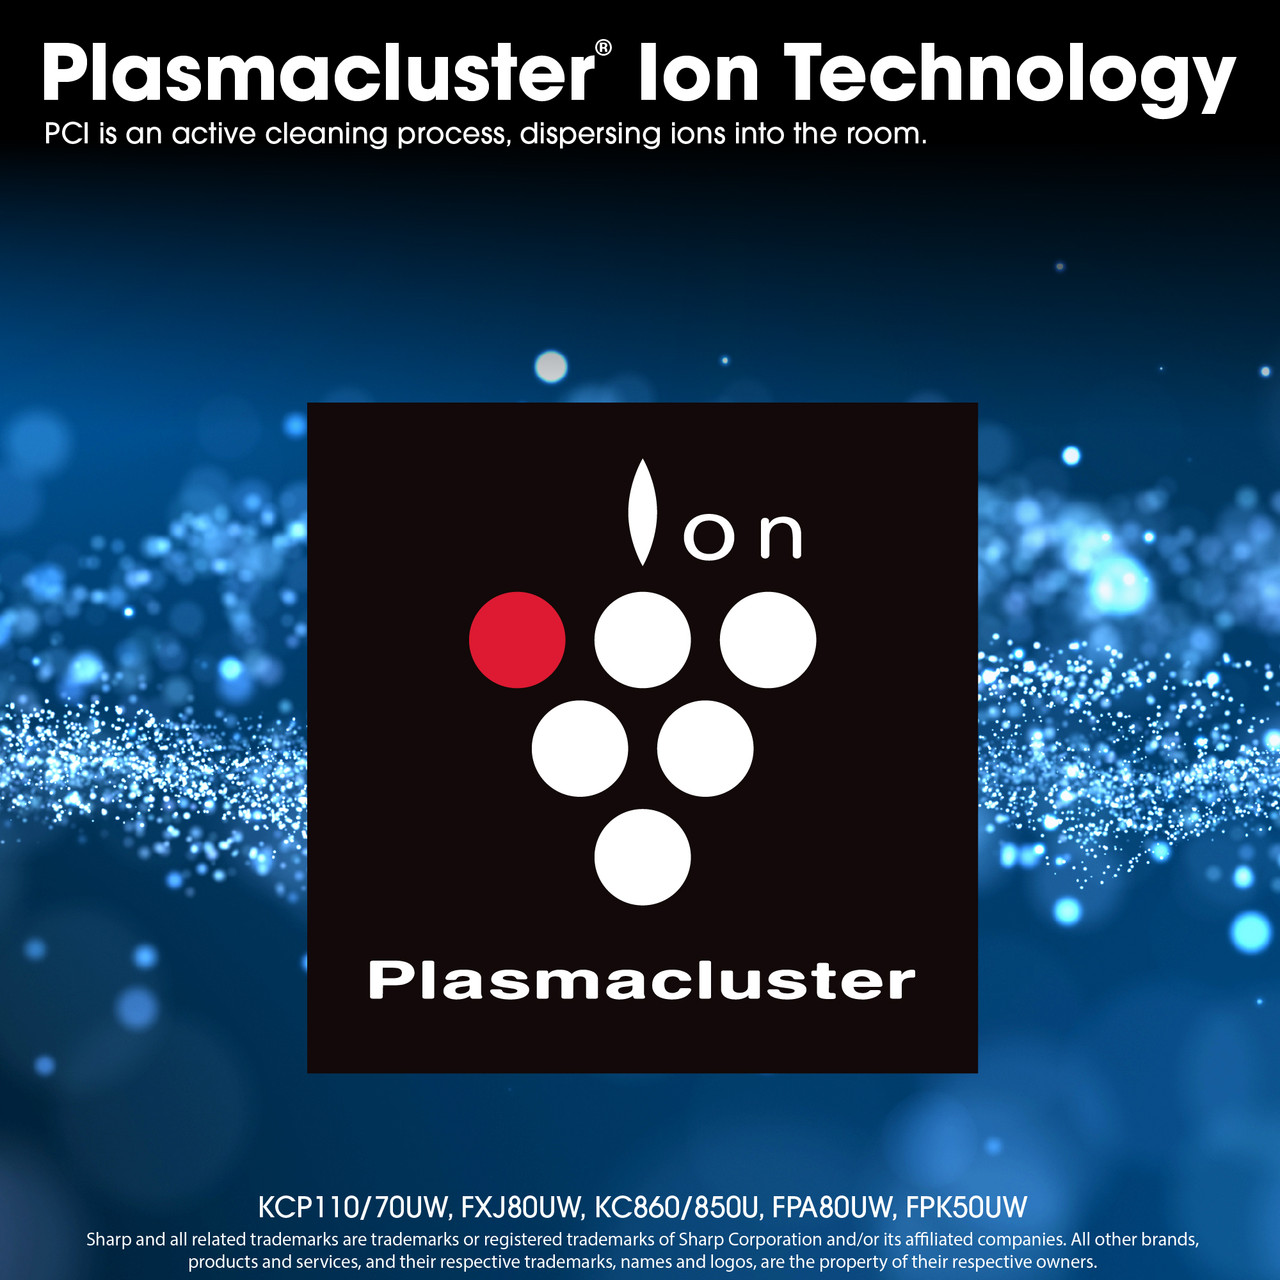 Plasmacluster Ion Technology
PCI is an active cleaning process, dispersing ions into the room.
KCP110/70UW, FXJ80UW, KC860/850U, FPA80UW, FPK50UW
Sharp and all related trademarks are trademarks or registered trademarks of Sharp Corporation and/or its affiliated companies. All other brands, products and services, and their respective trademarks, names and logos, are the property of their respective owners.
KCP70UW